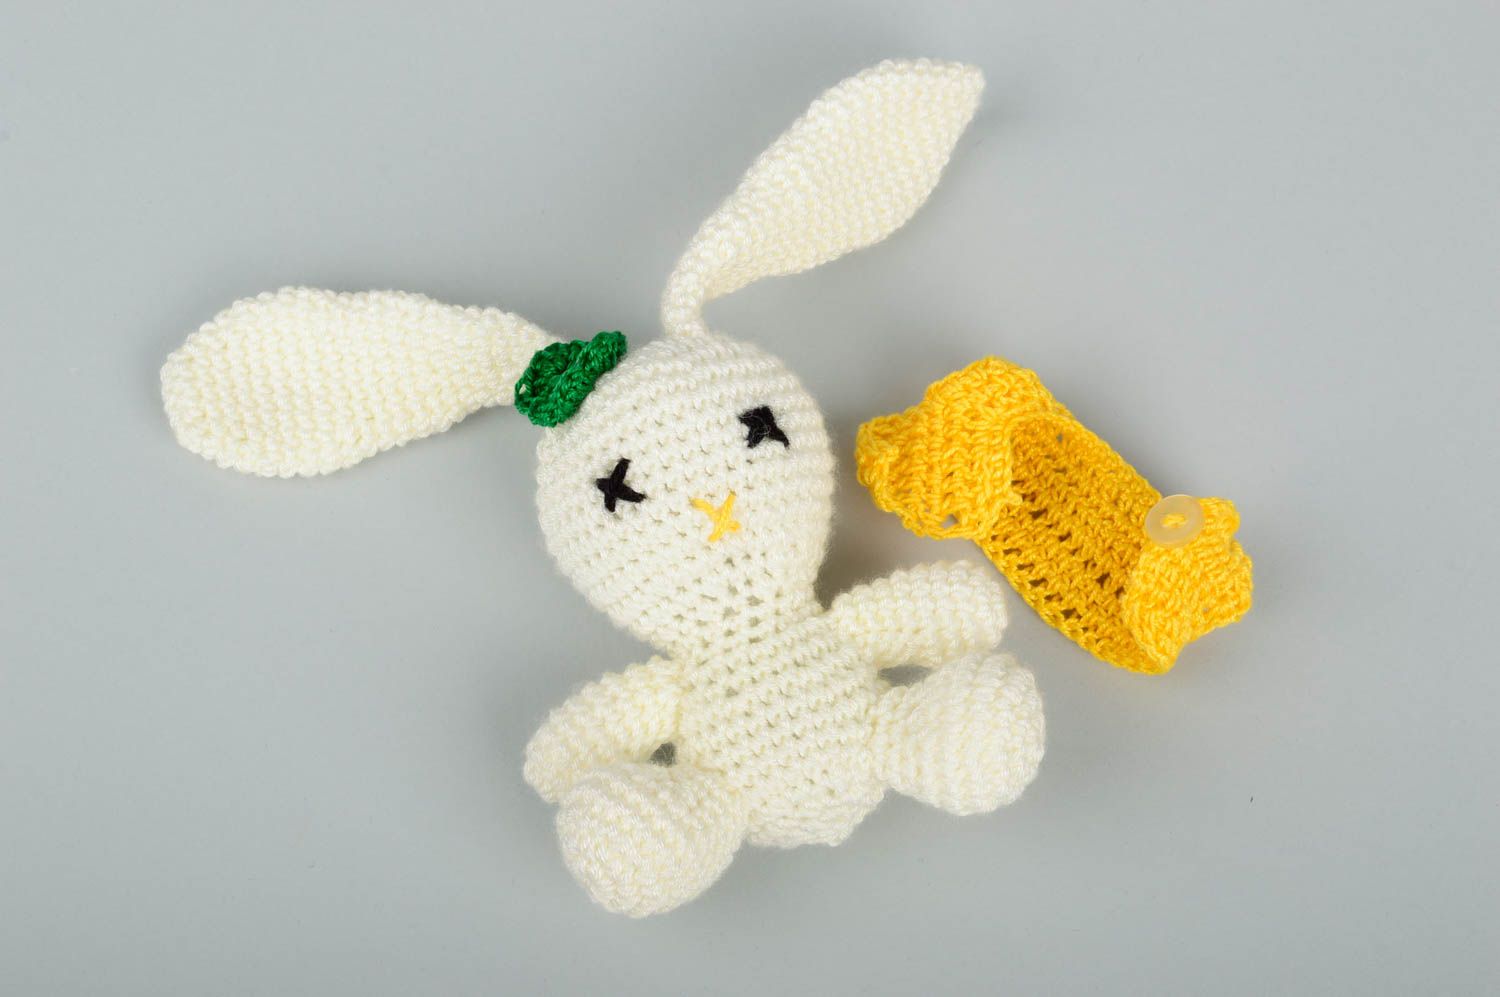 Cute handmade soft toy crochet toy for kids stuffed toy birthday gift ideas photo 3